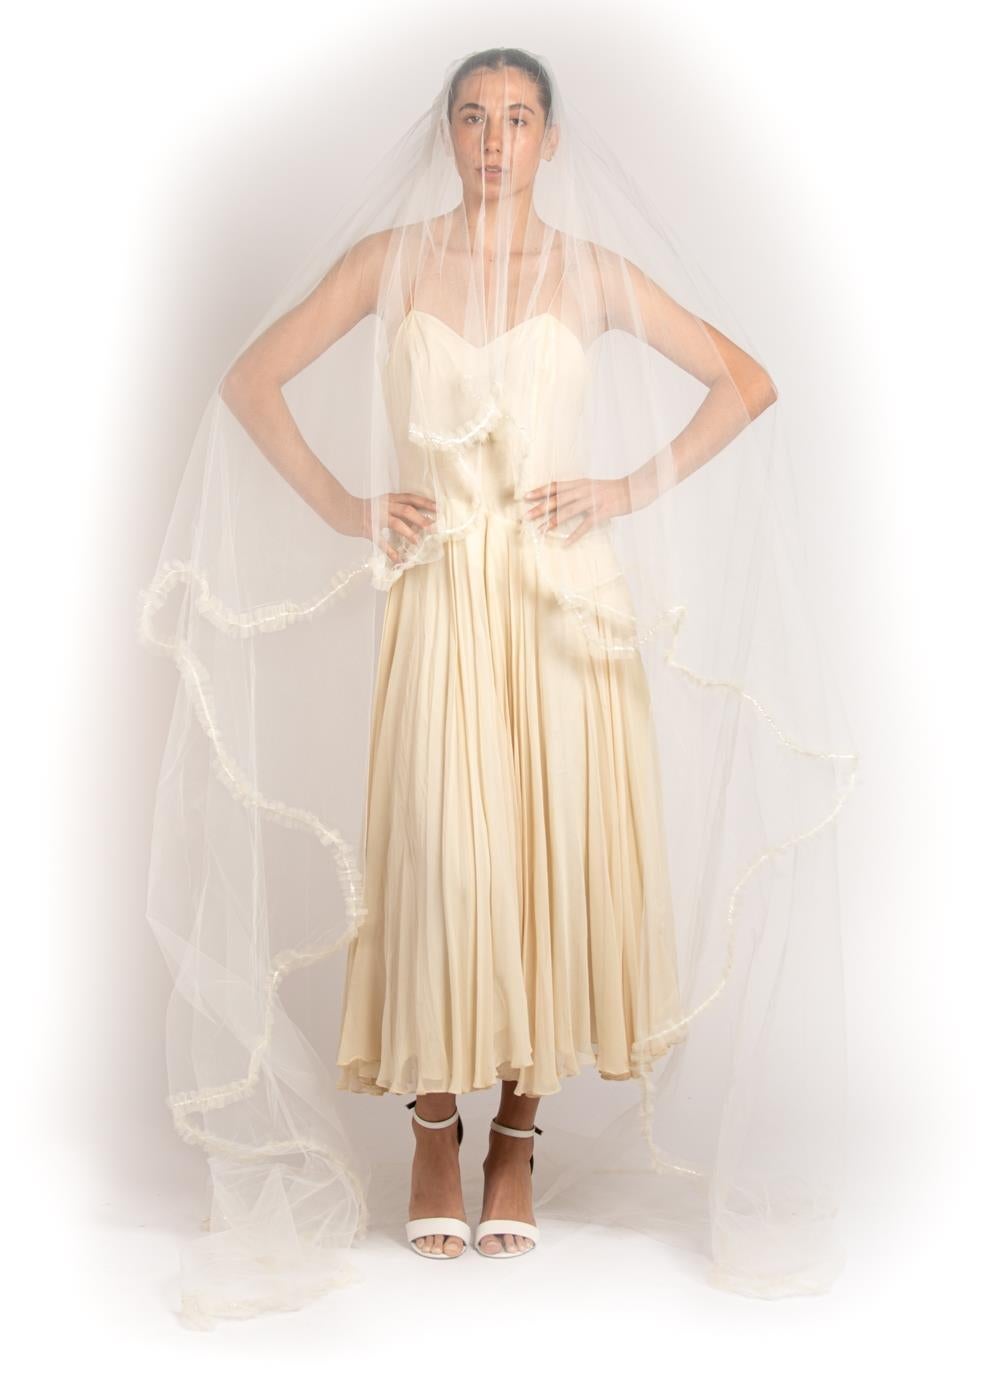 White Tulle With Comb Veil In Excellent Condition For Sale In New York, NY